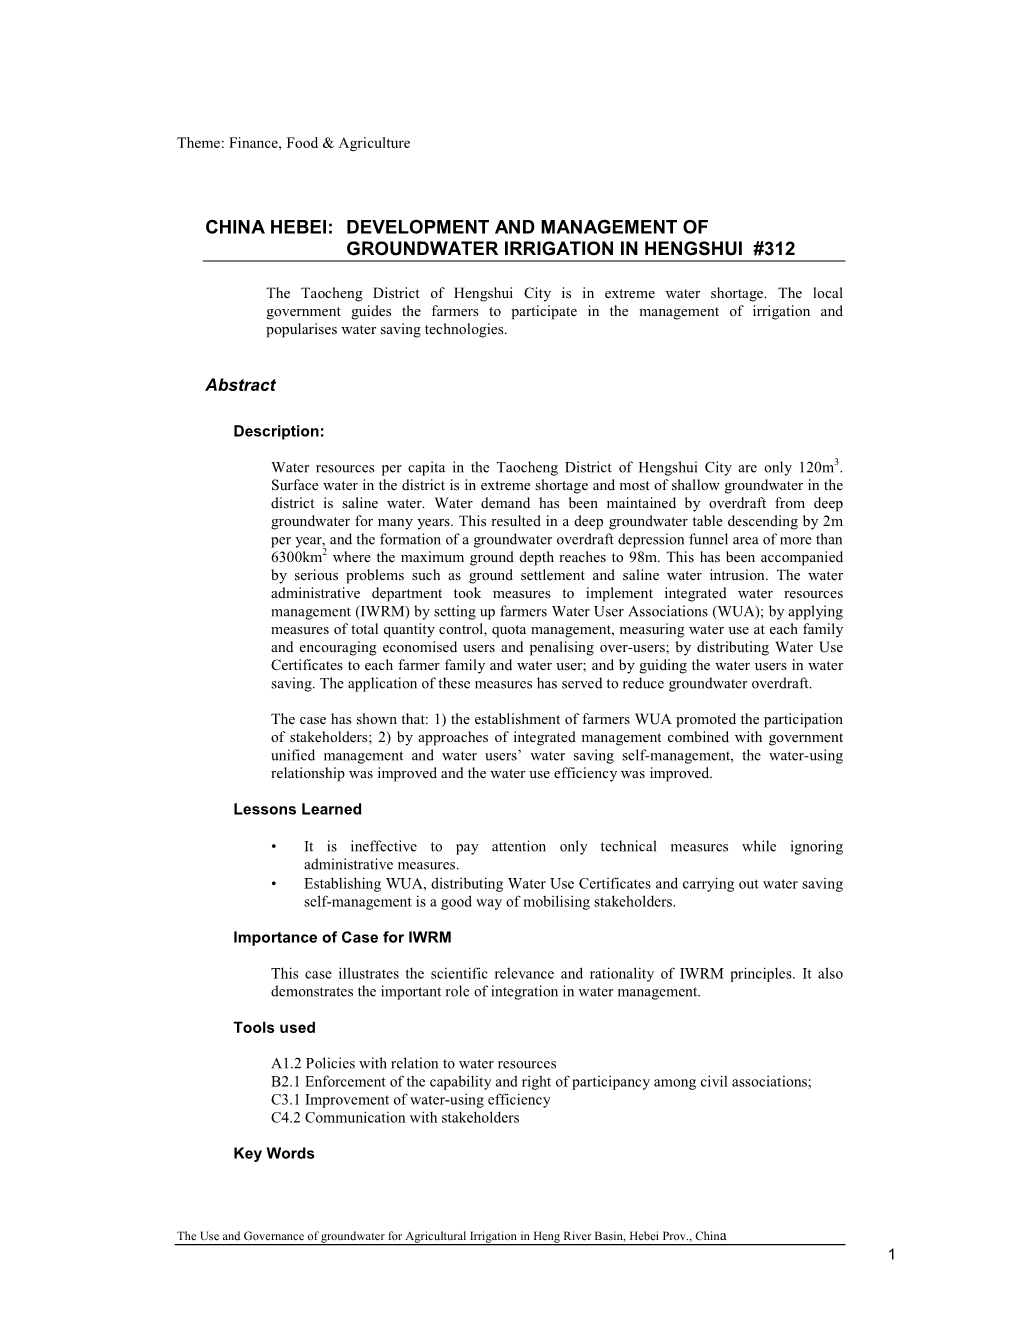 China Hebei: Development and Management of Groundwater Irrigation in Hengshui #312